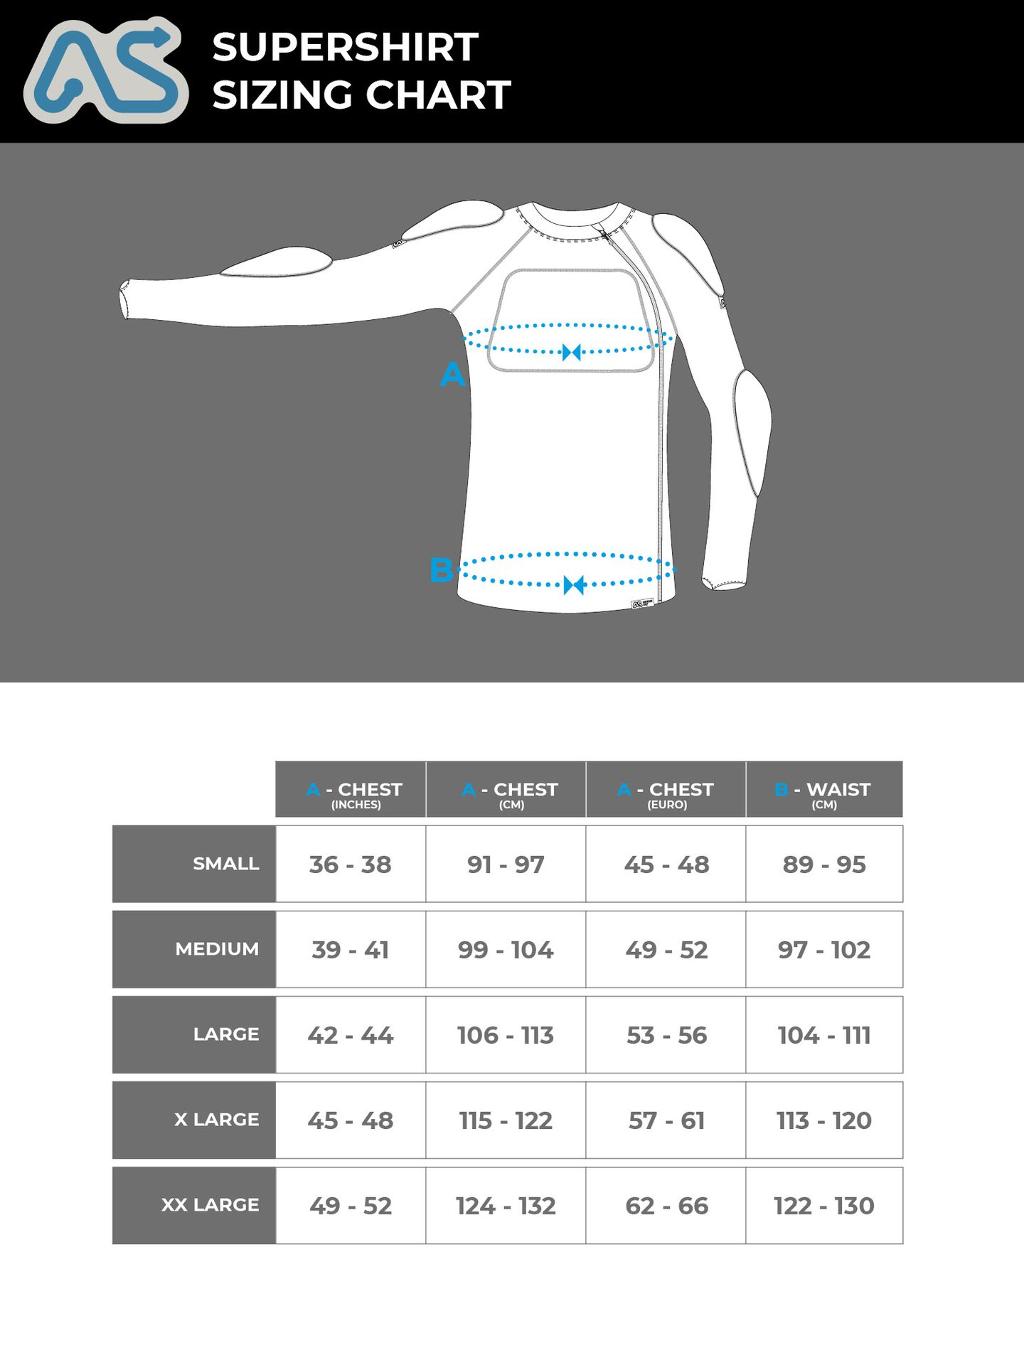 The Supershirt real world sizing | Adventure Spec US